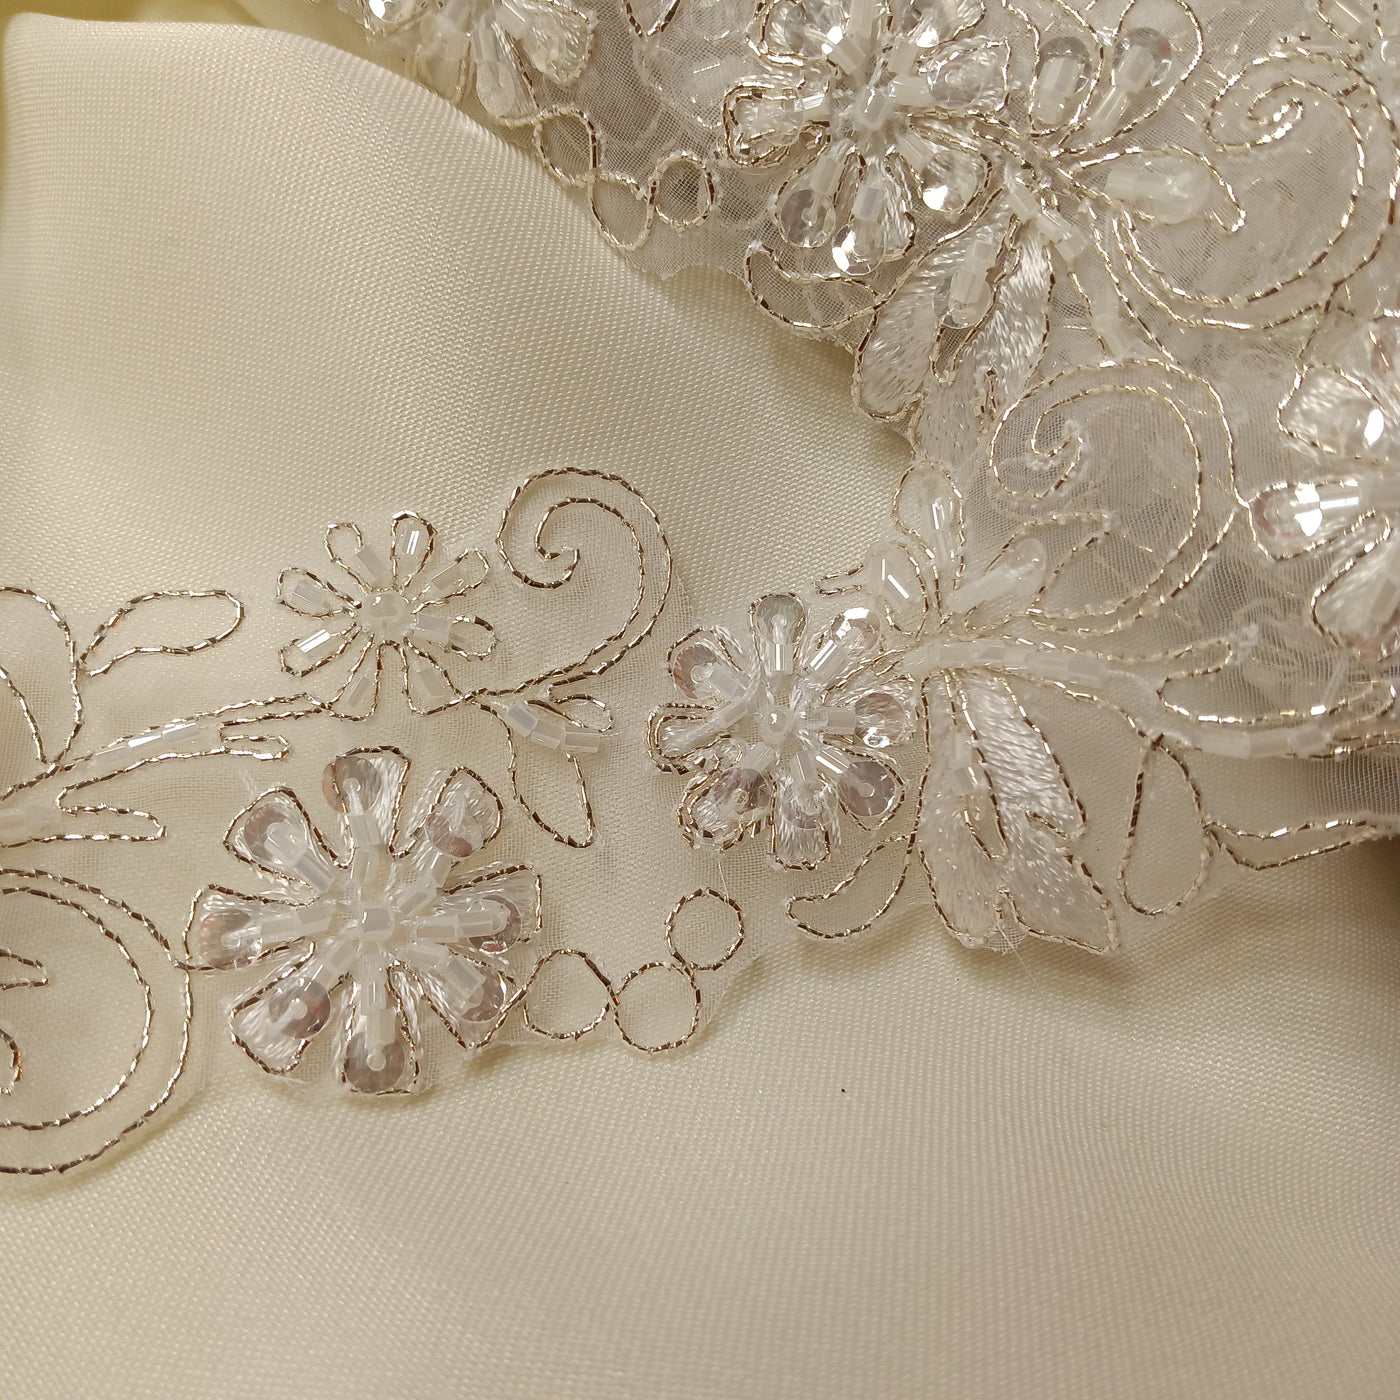 Beaded, Corded & Embroidered on Organza Ivory with Silver Trimming. Lace Usa